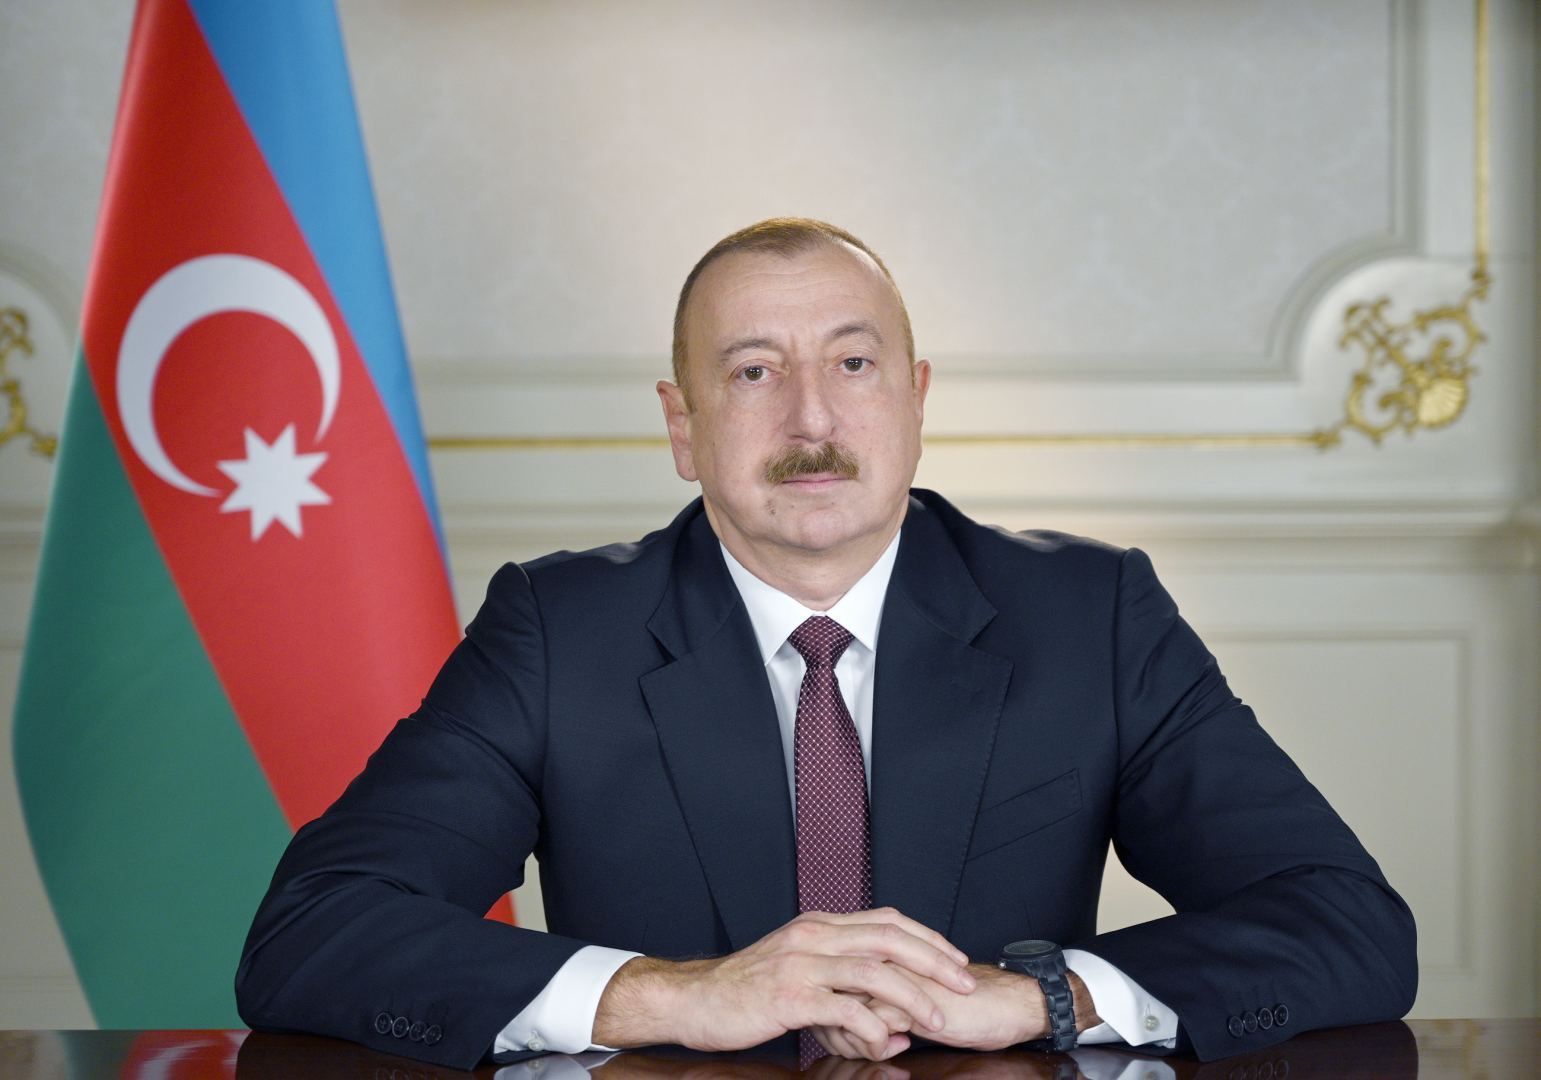 Official dinner hosted in honor of Azerbaijani, Turkish presidents and their wives